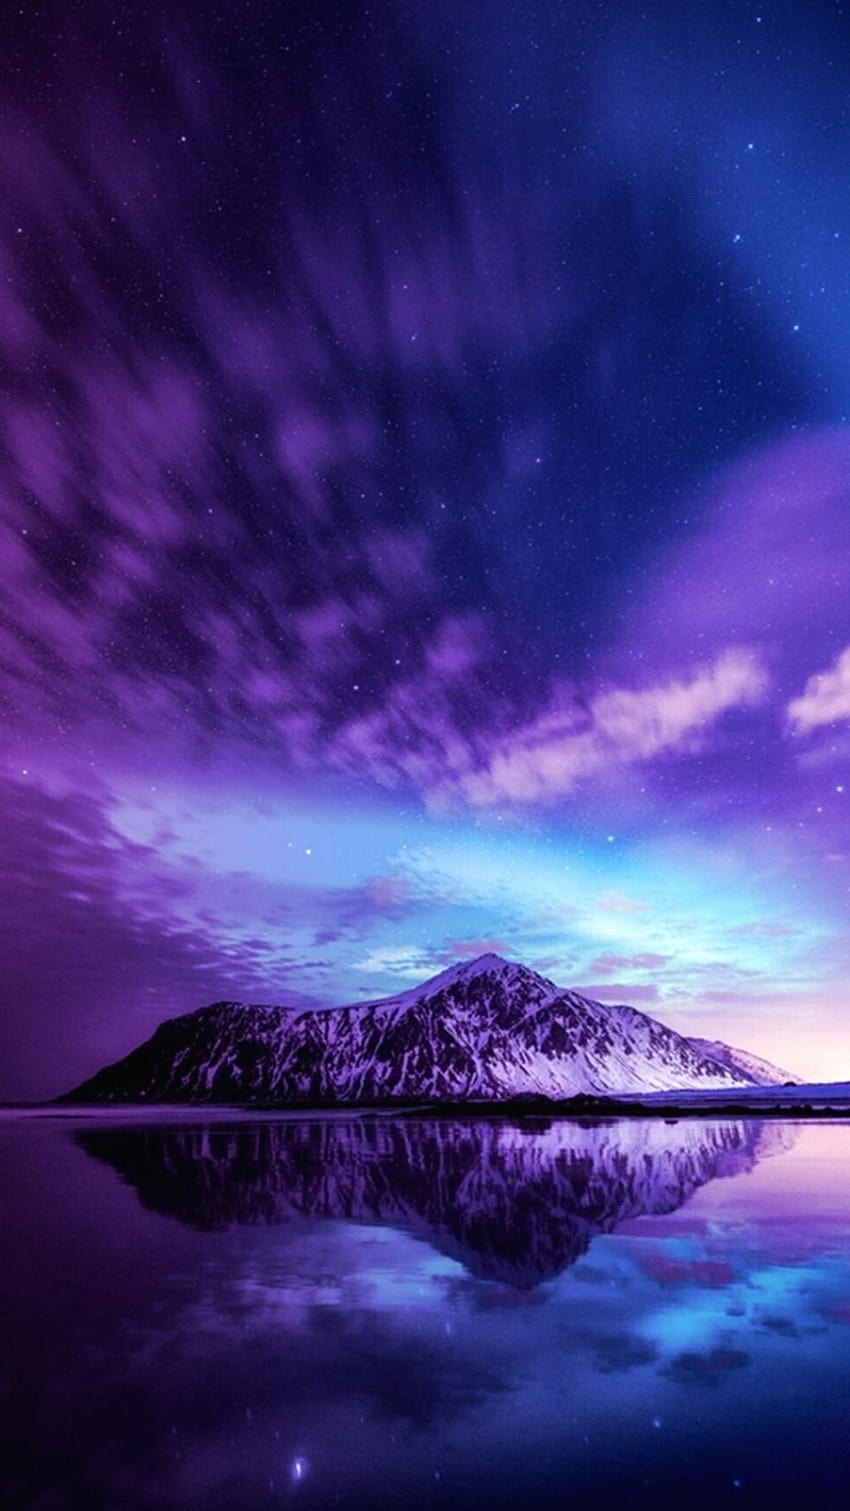 A beautiful night sky with stars and a purple mountain - Landscape